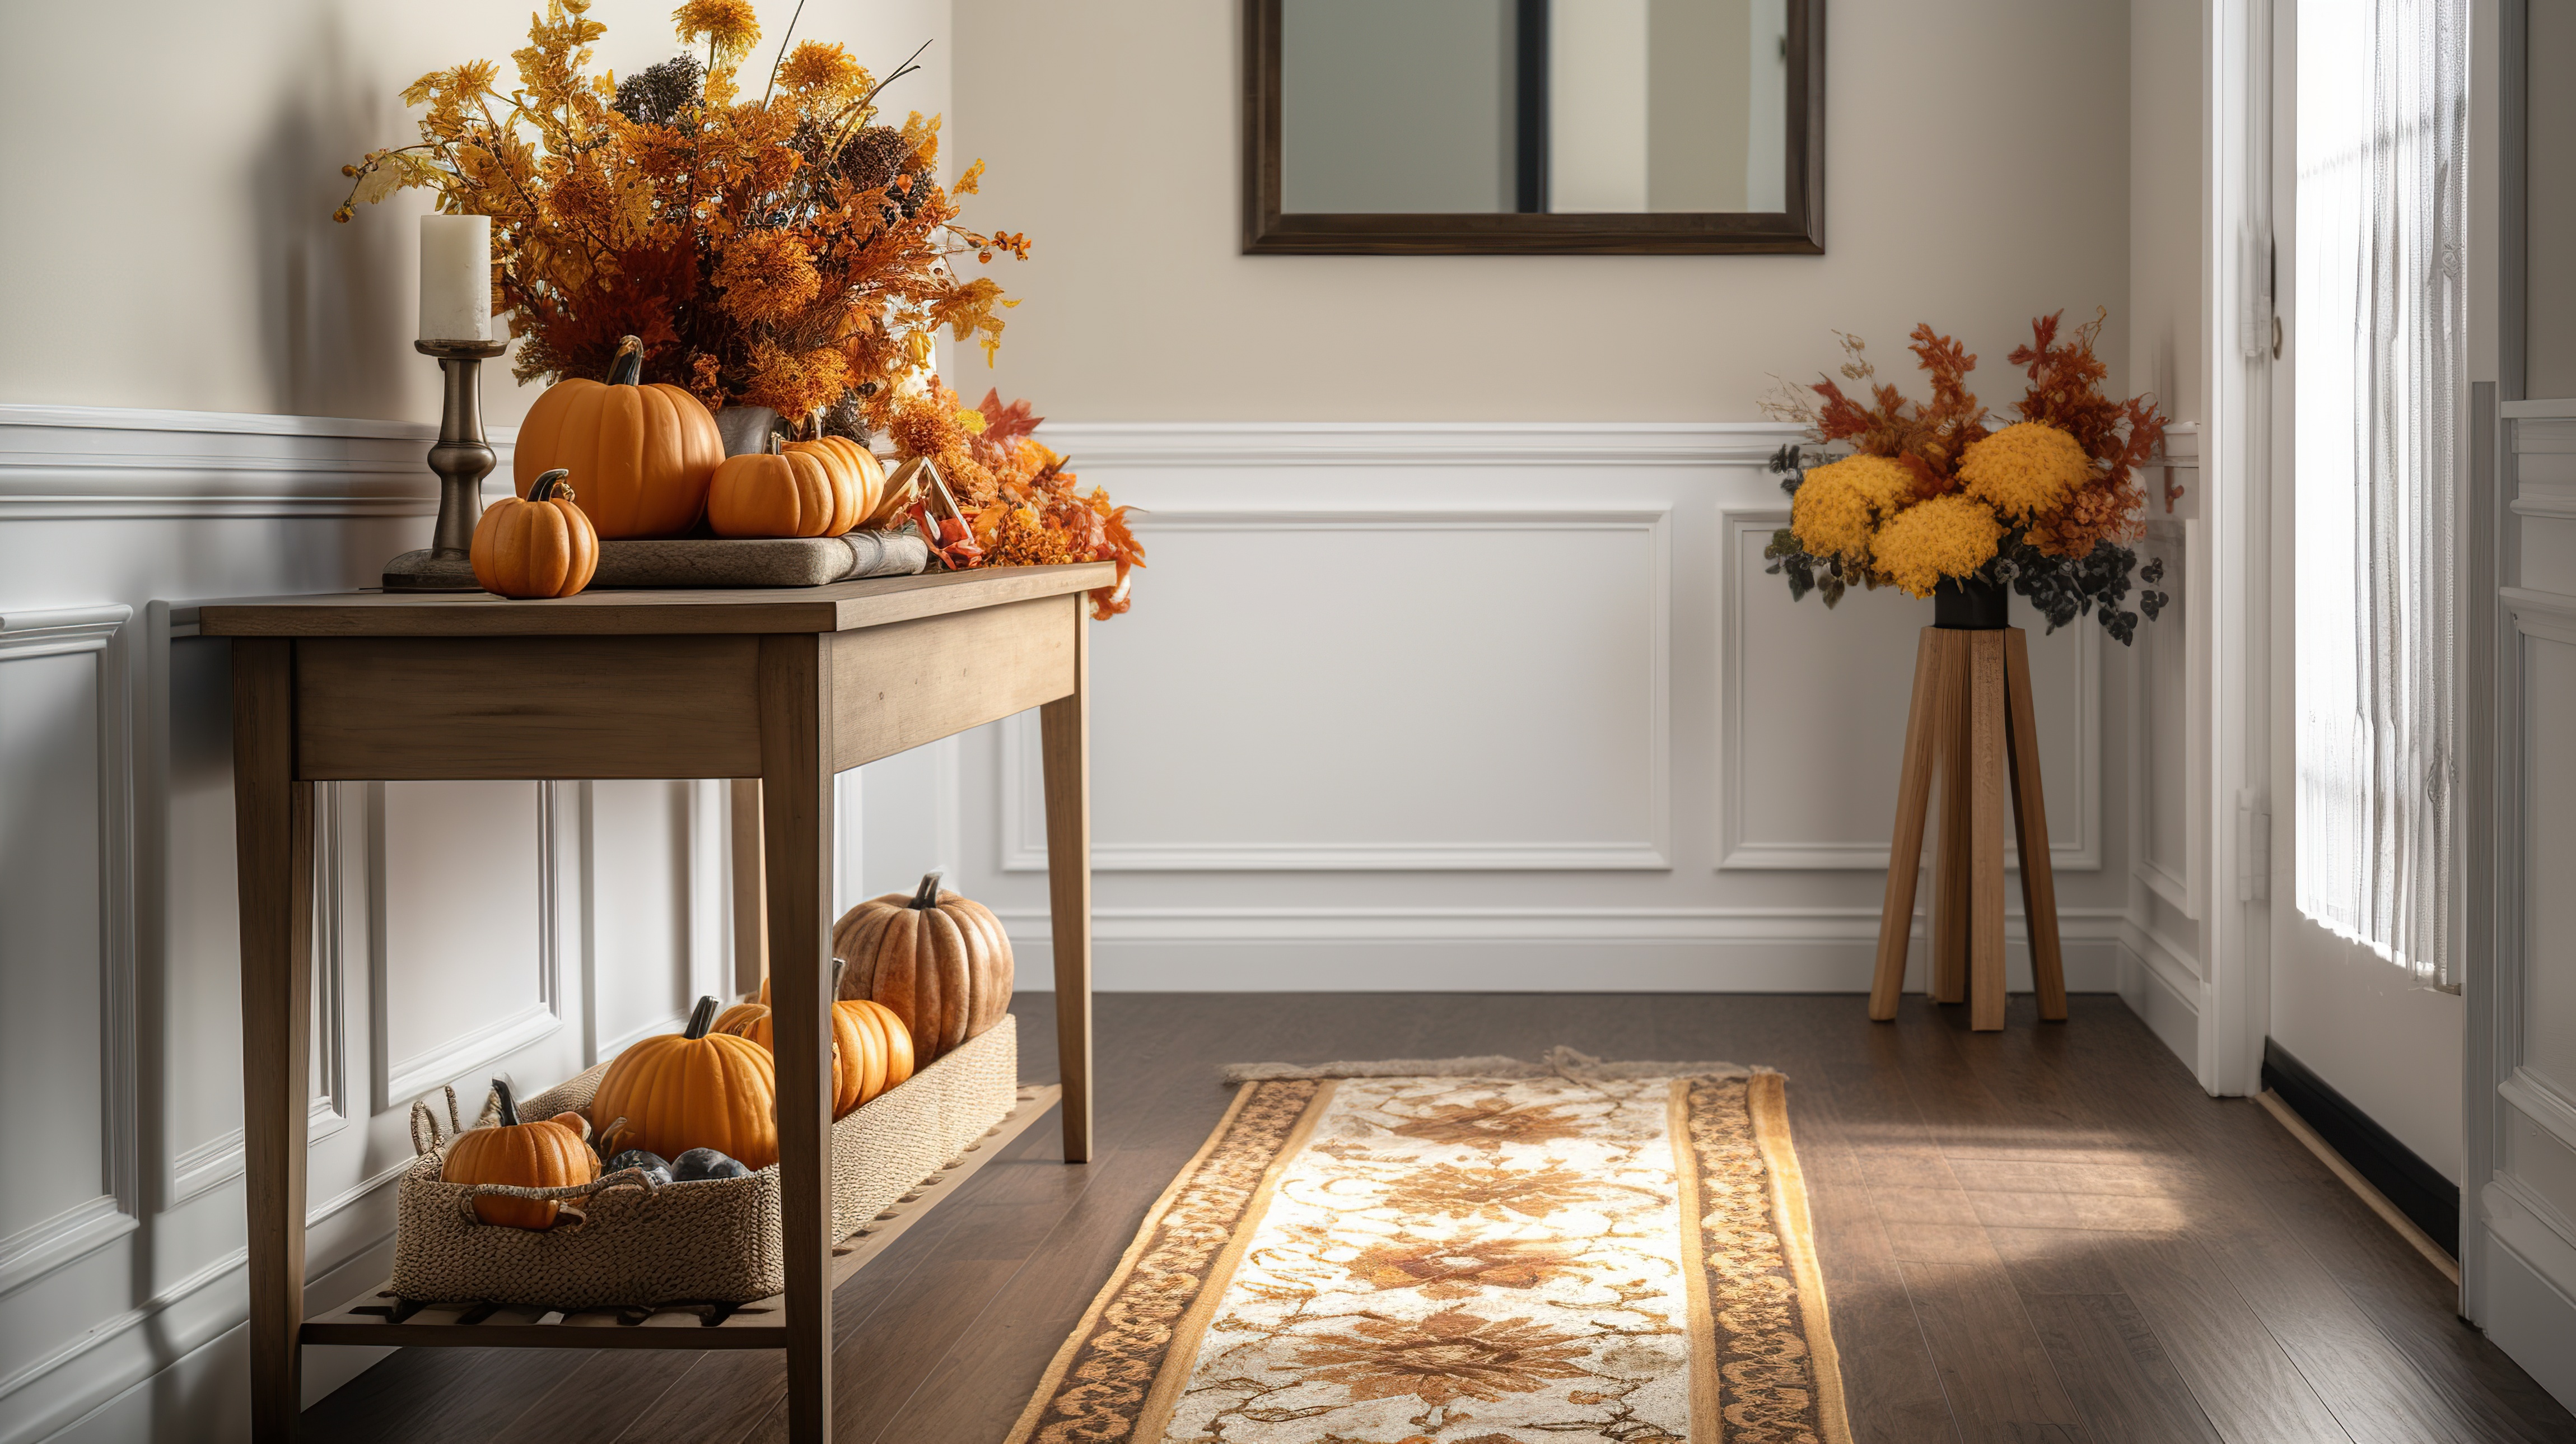 Embrace the beauty of the season by incorporating some autumn-themed decorations